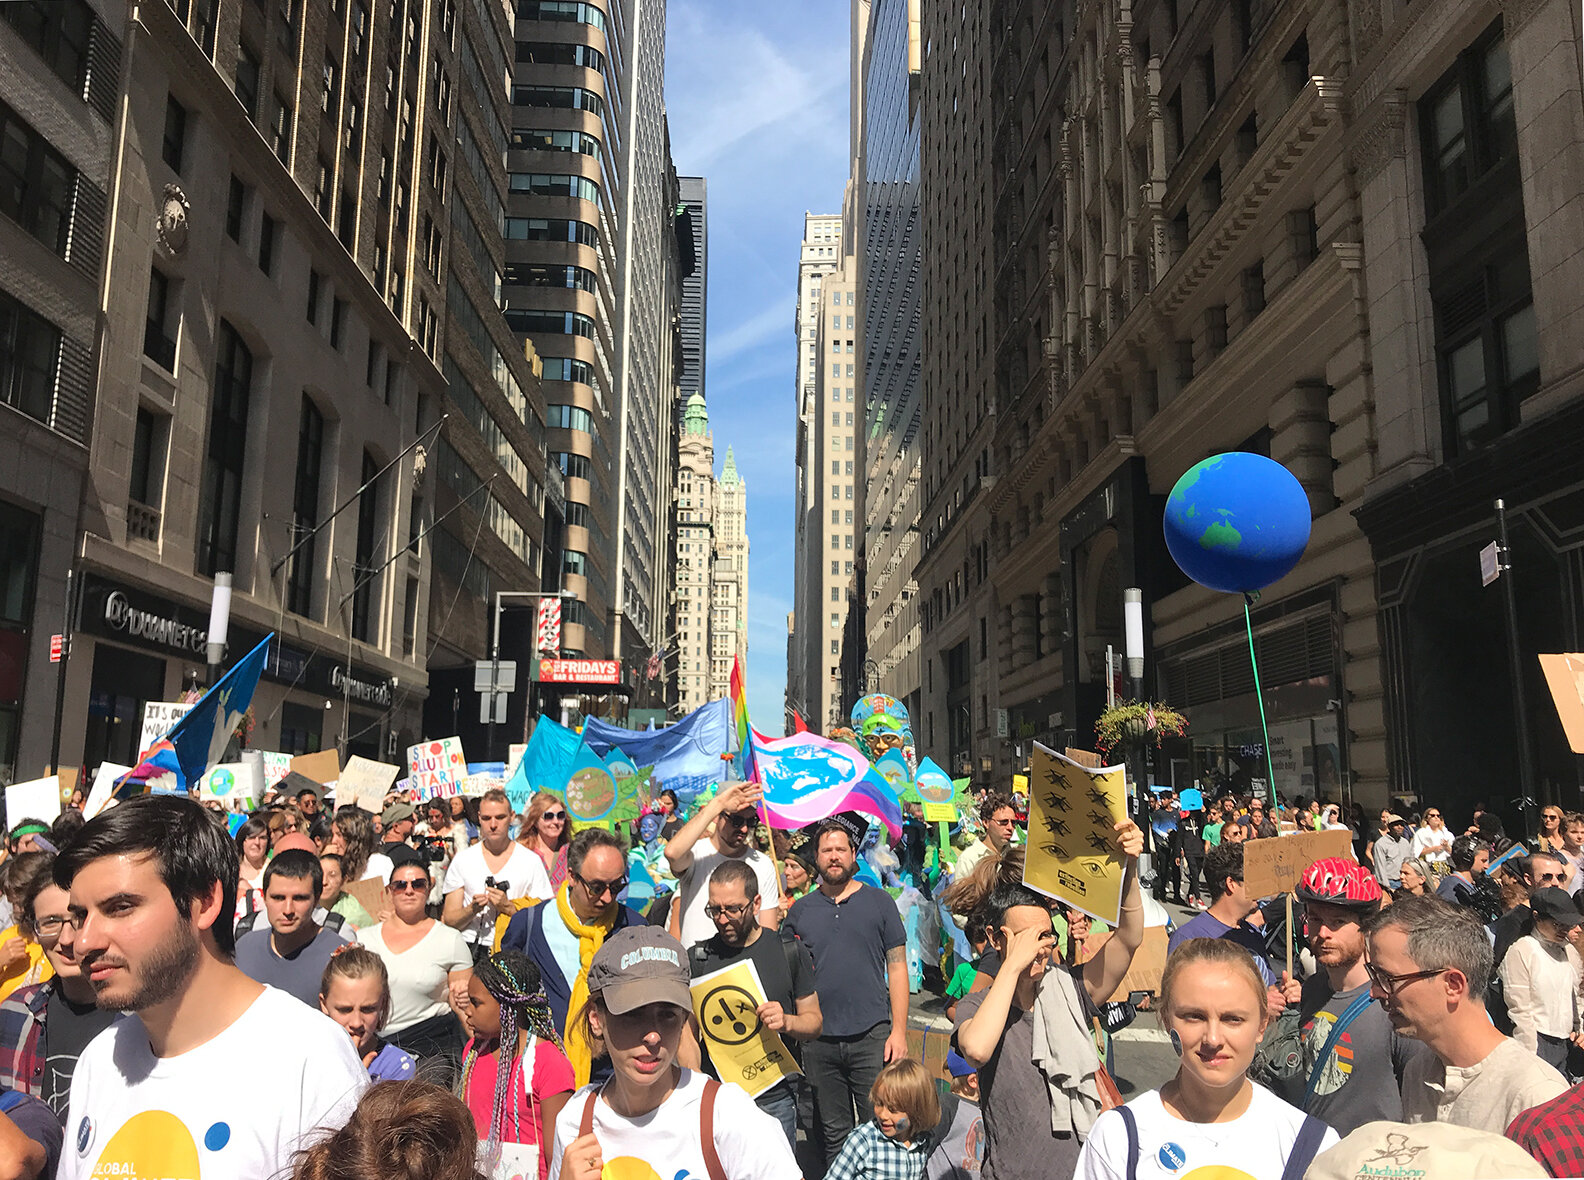  We flooded the streets of New York City. Over 250,000 people joined the Climate Strike in NYC on September 20th, 2019. 